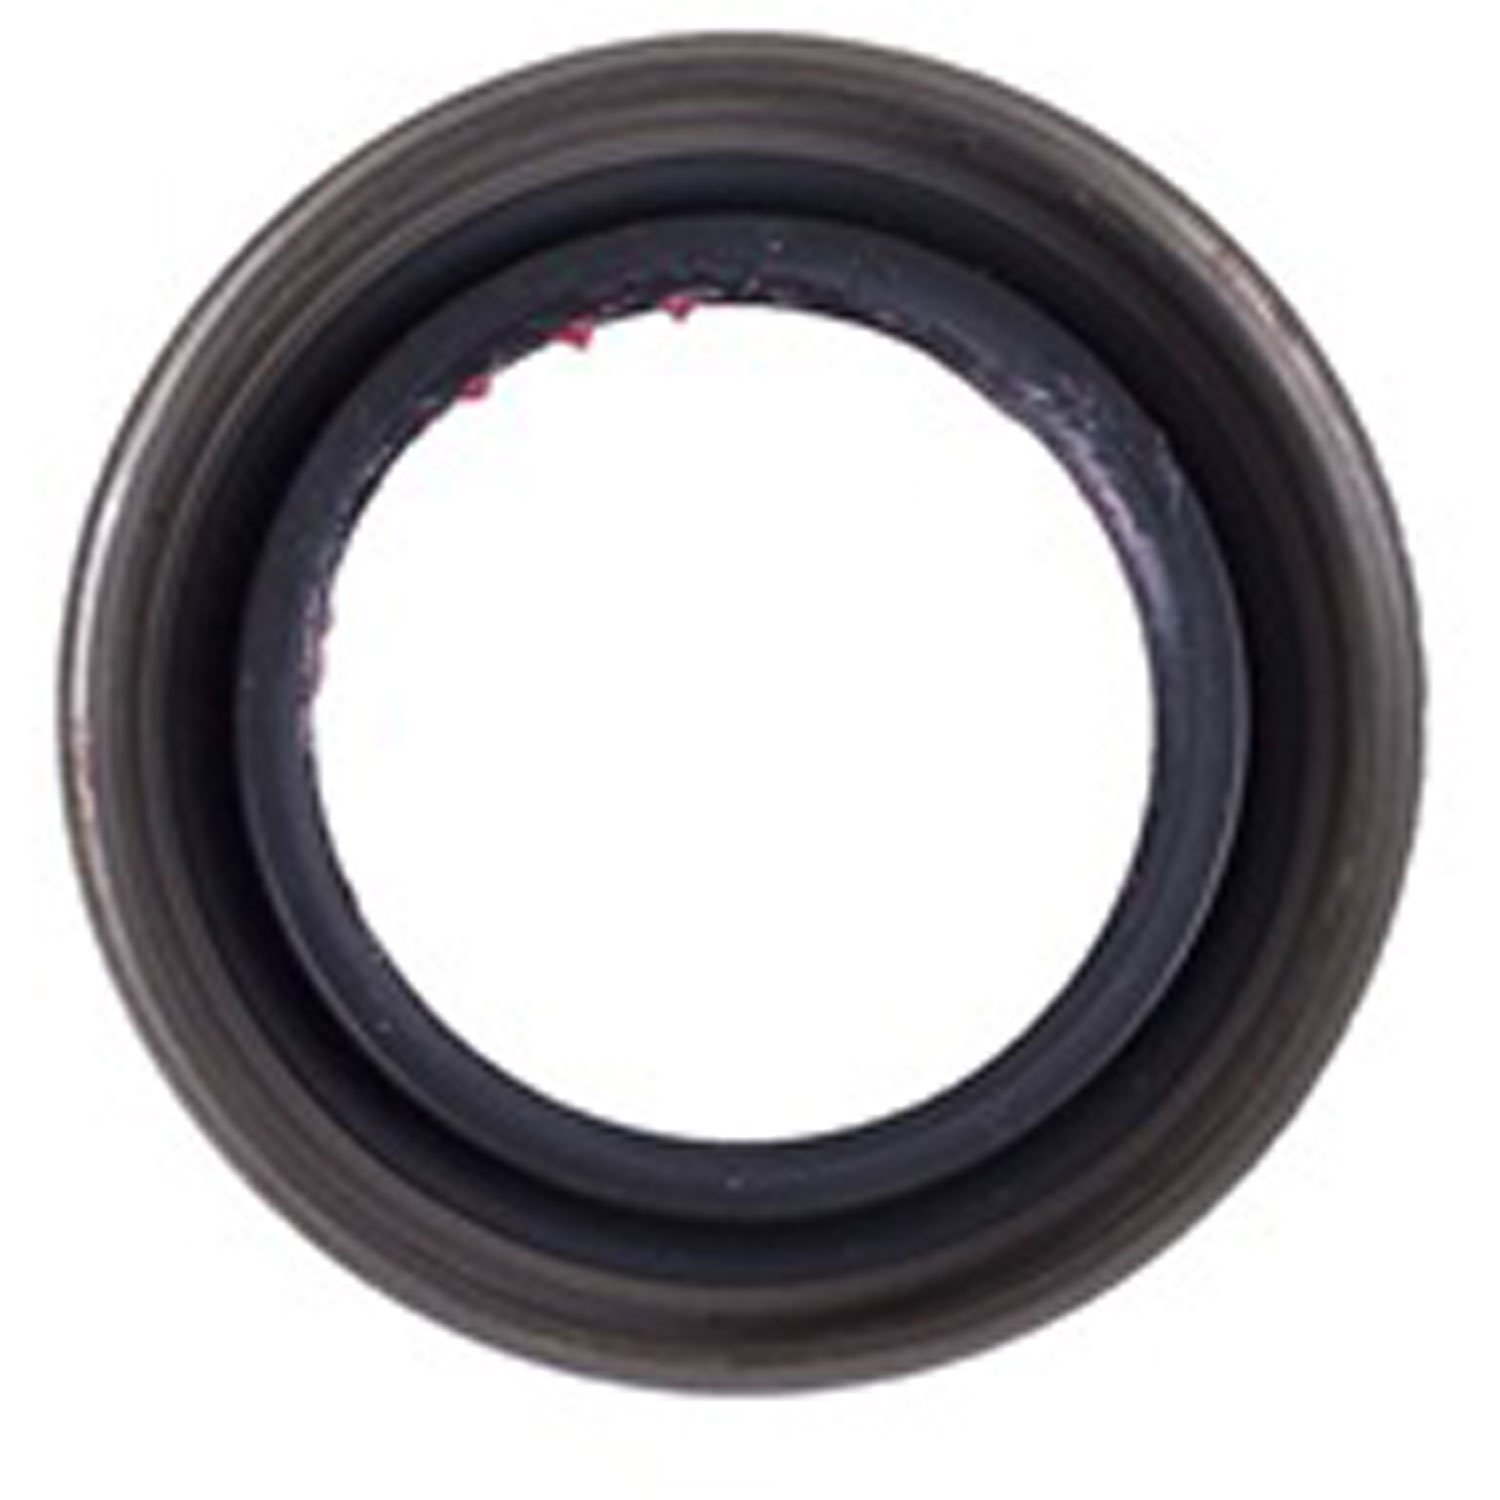 This outer axle oil seal from Omix-ADA fits on 07-16 Jeep Wranglers with rear Dana 44 and the rear a